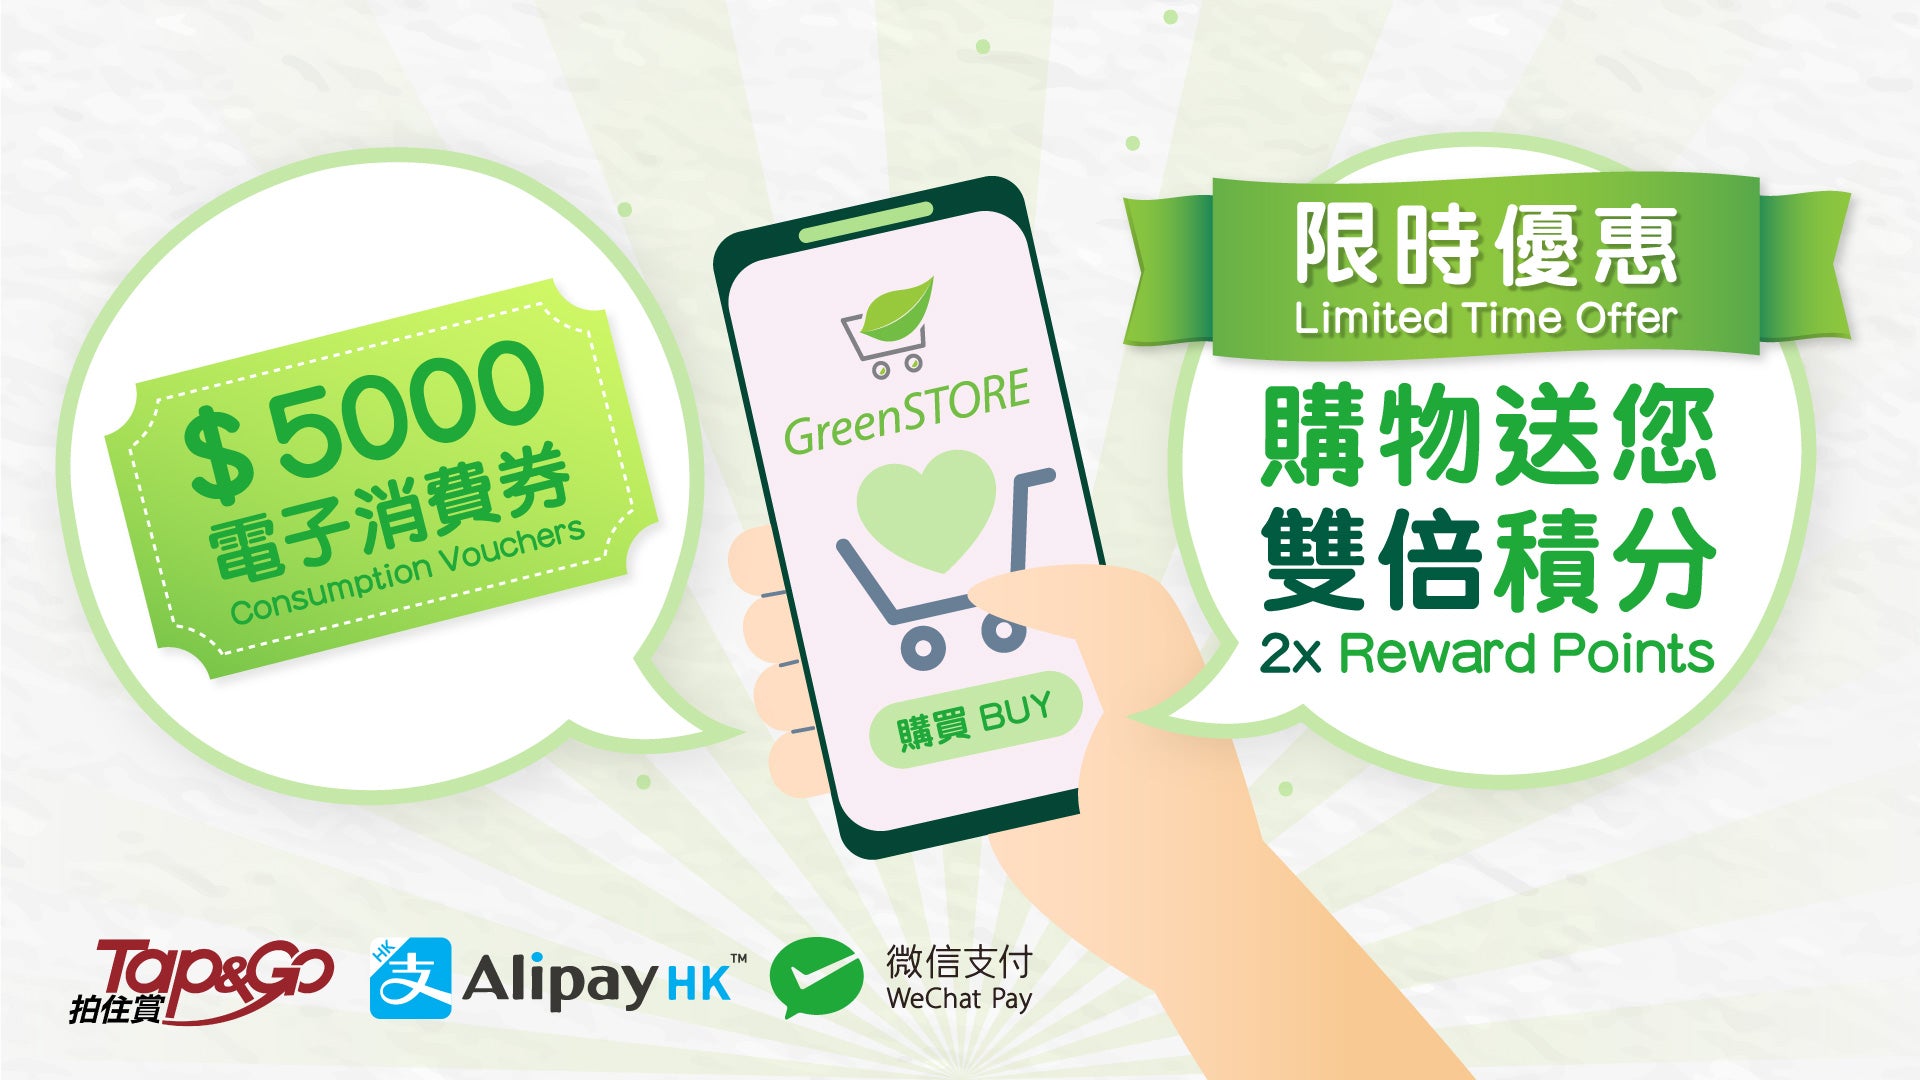 【2x Points】Let's Make Good Use of The Consumption Vouchers!<br>＊Products, Services Both Available